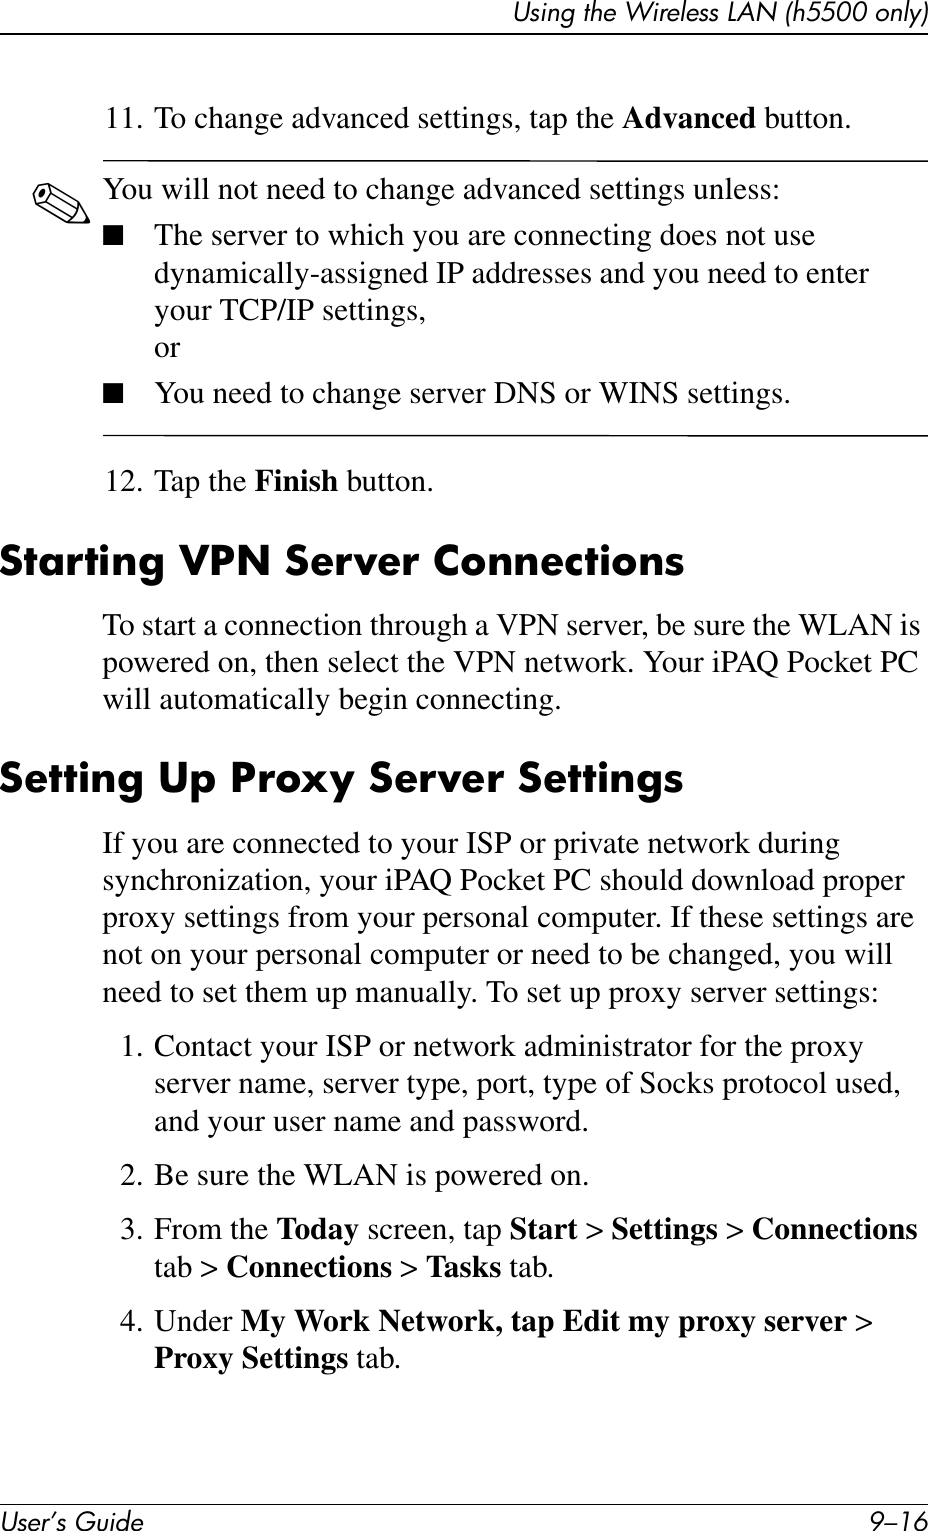 User’s Guide 9–16Using the Wireless LAN (h5500 only)11. To change advanced settings, tap the Advanced button.✎You will not need to change advanced settings unless:■The server to which you are connecting does not use dynamically-assigned IP addresses and you need to enter your TCP/IP settings,or■You need to change server DNS or WINS settings.12. Tap the Finish button.Starting VPN Server ConnectionsTo start a connection through a VPN server, be sure the WLAN is powered on, then select the VPN network. Your iPAQ Pocket PC will automatically begin connecting.Setting Up Proxy Server SettingsIf you are connected to your ISP or private network during synchronization, your iPAQ Pocket PC should download proper proxy settings from your personal computer. If these settings are not on your personal computer or need to be changed, you will need to set them up manually. To set up proxy server settings:1. Contact your ISP or network administrator for the proxy server name, server type, port, type of Socks protocol used, and your user name and password.2. Be sure the WLAN is powered on.3. From the Today screen, tap Start &gt; Settings &gt; Connections tab &gt; Connections &gt; Tasks tab.4. Under My Work Network, tap Edit my proxy server &gt; Proxy Settings tab.